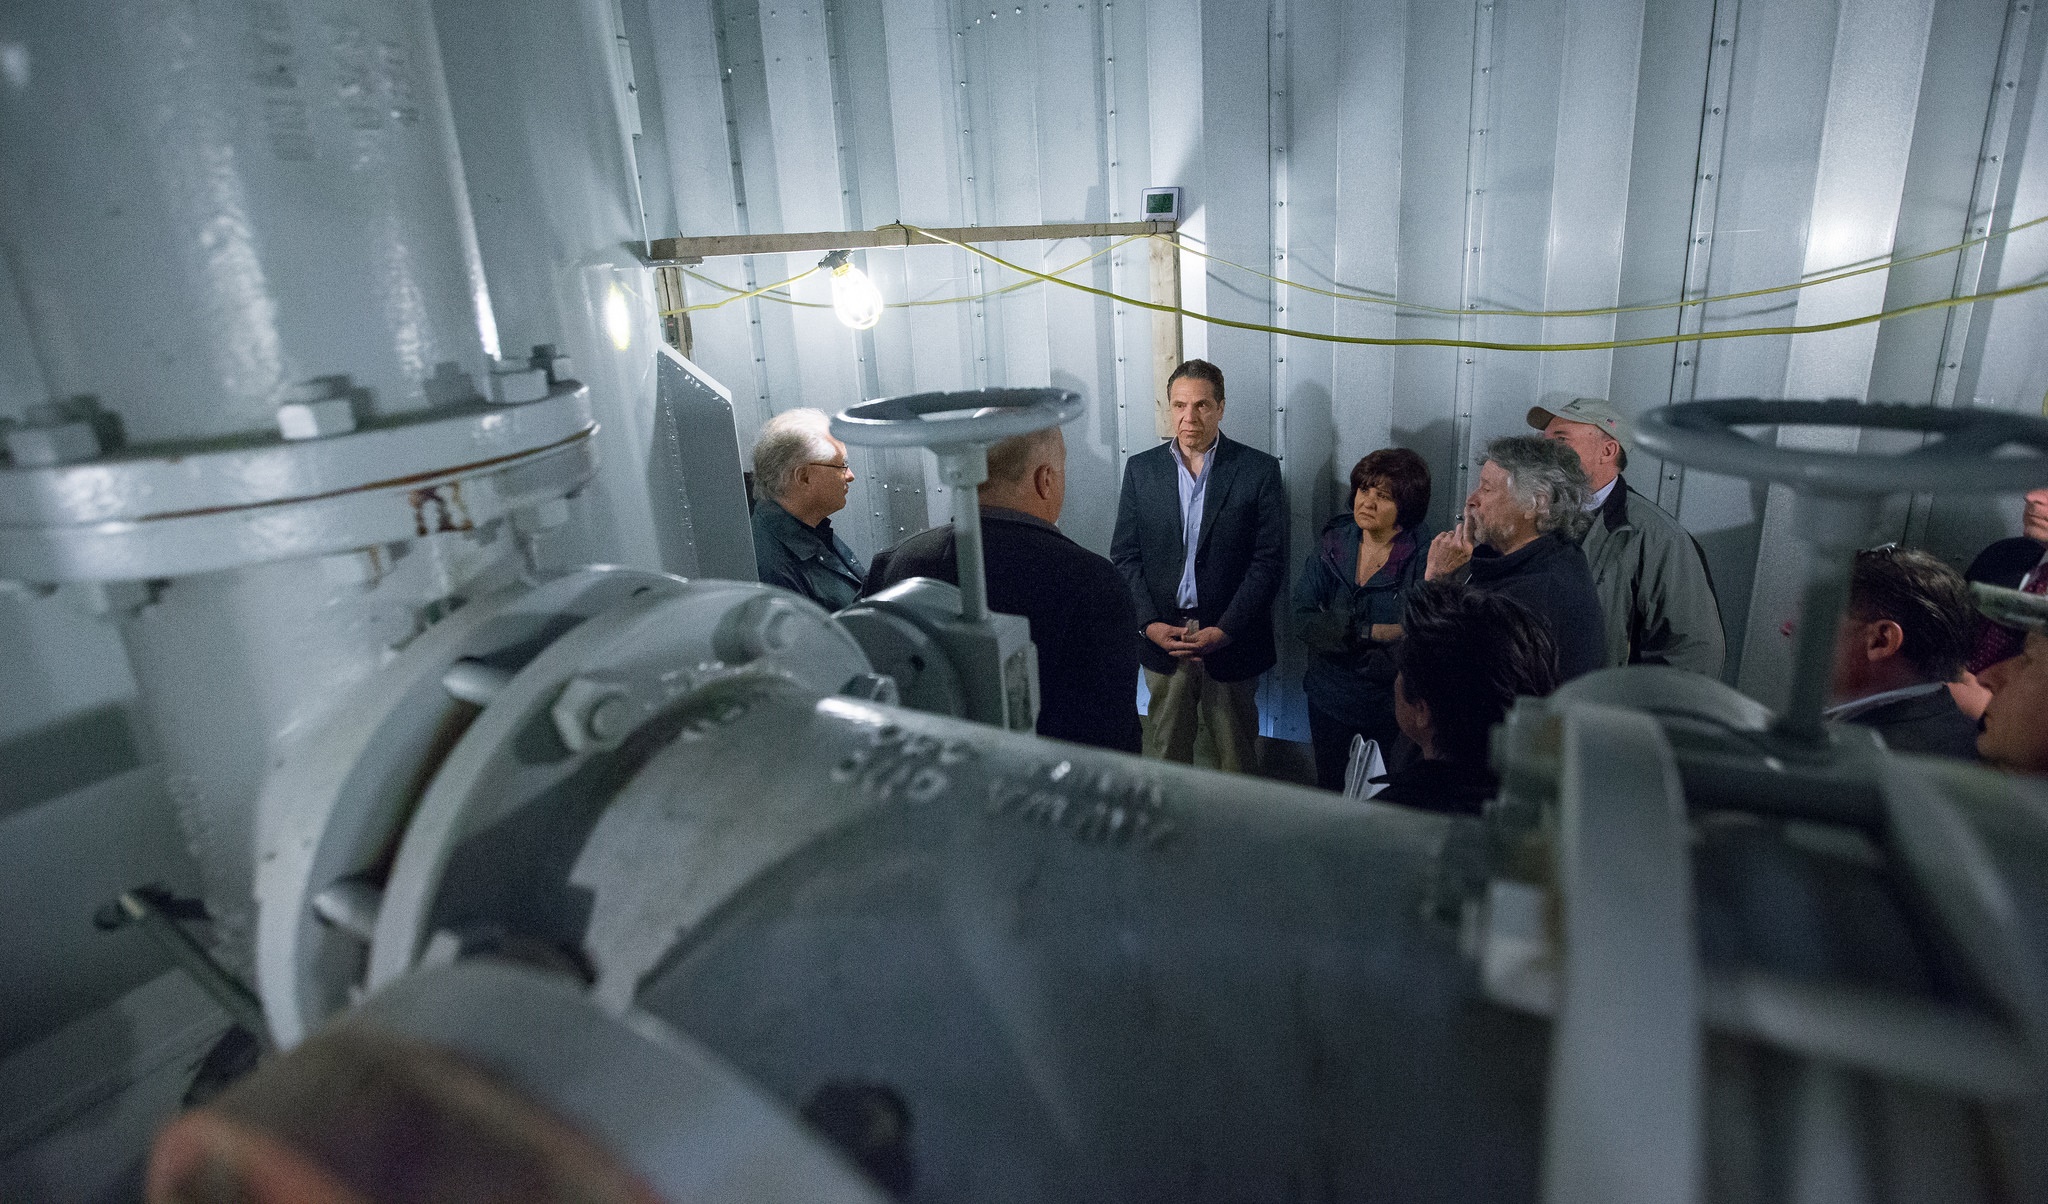 Gov. Andrew Cuomo met with Hoosick Falls officials and other state authorities to tour the Village of Hoosick Falls water treatment plant in this March 2016 photo. The Hoosick Falls water source was contaminated with the chemical PFOA. Photo courtesy of New York Governor's Office